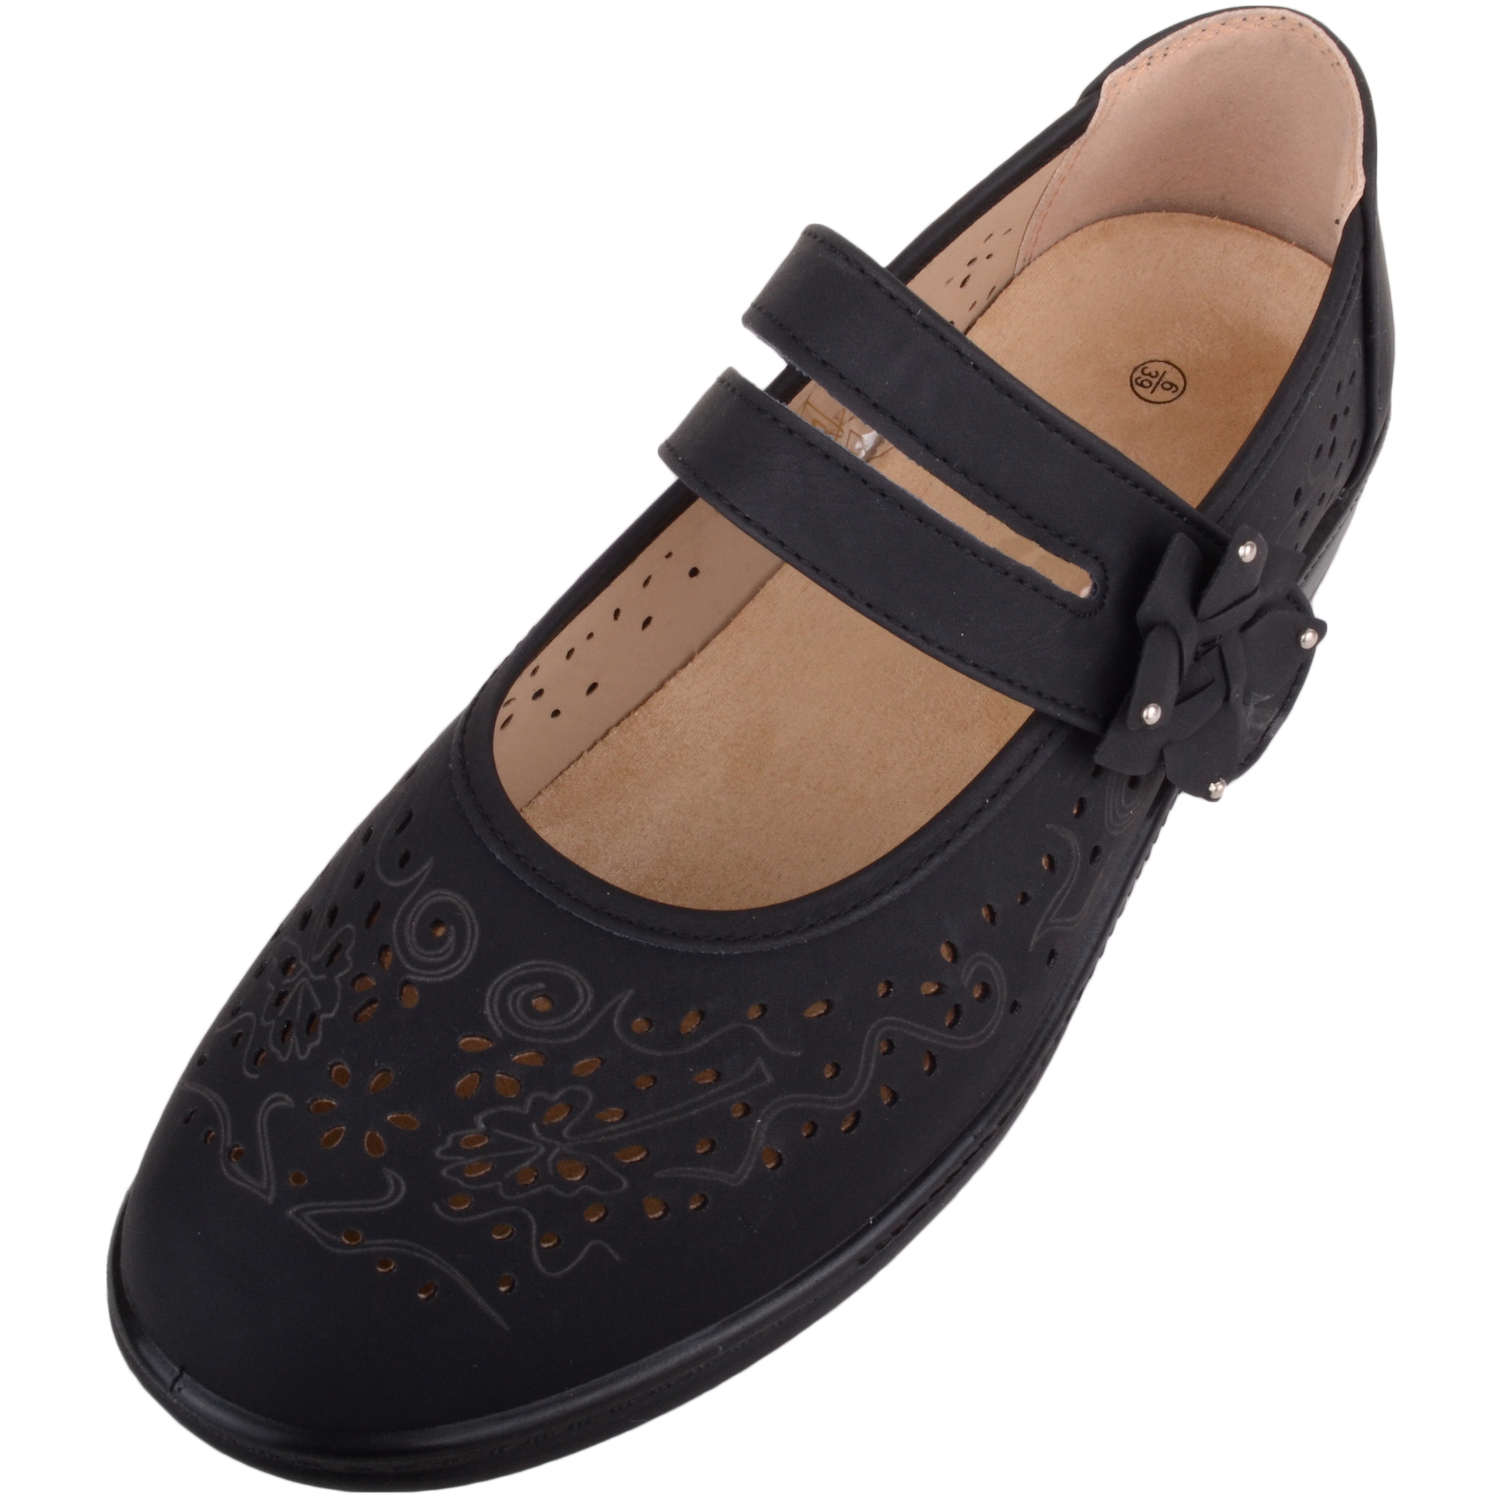 ladies wide fit leather shoes uk